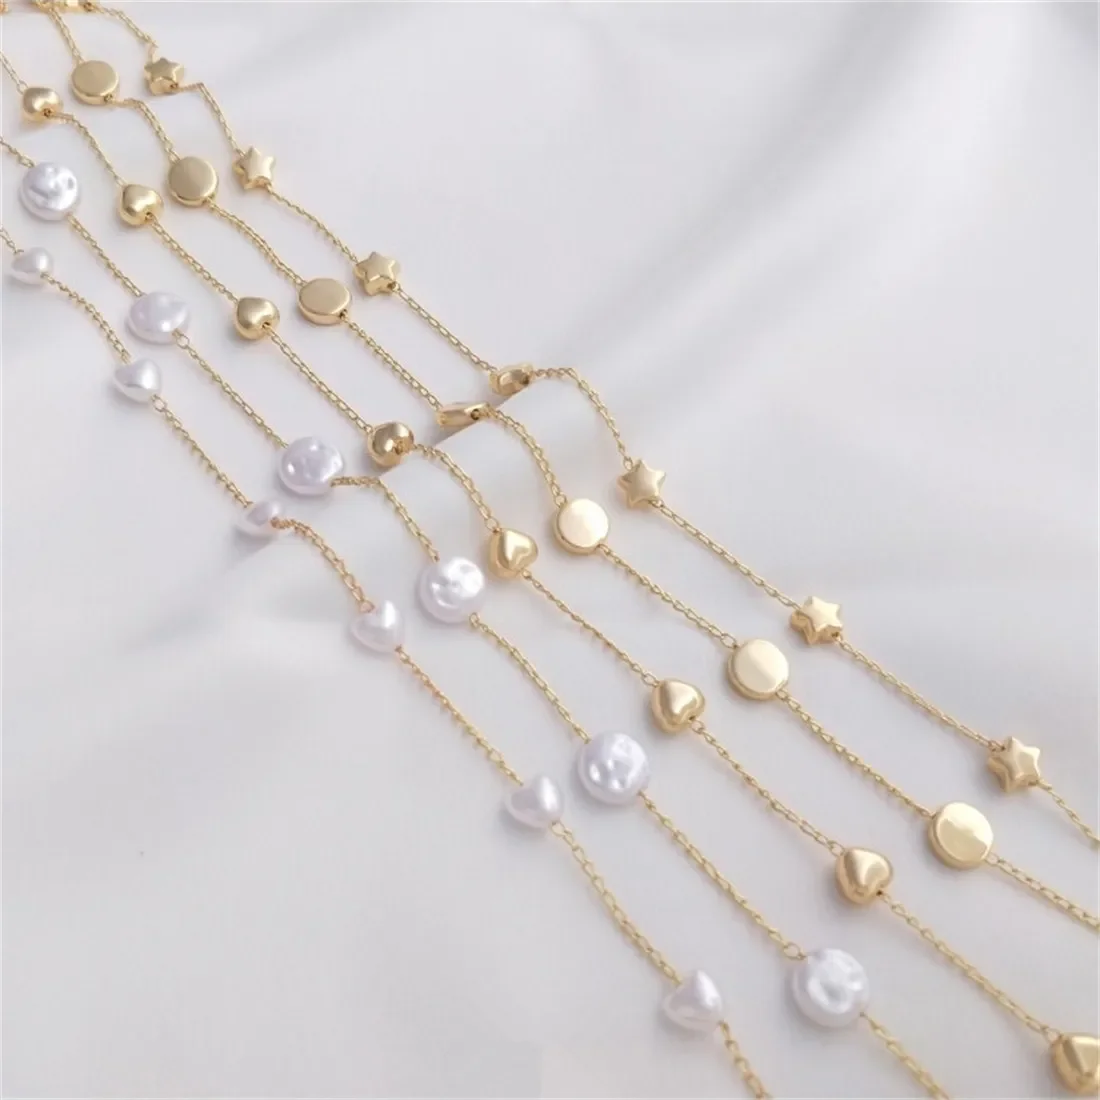 

14K Gold Hearts Five-pointed Stars Separated Beads Chain Baroque Imitation Pearl Chain Diy Handmade Chain Necklace Loose Chain